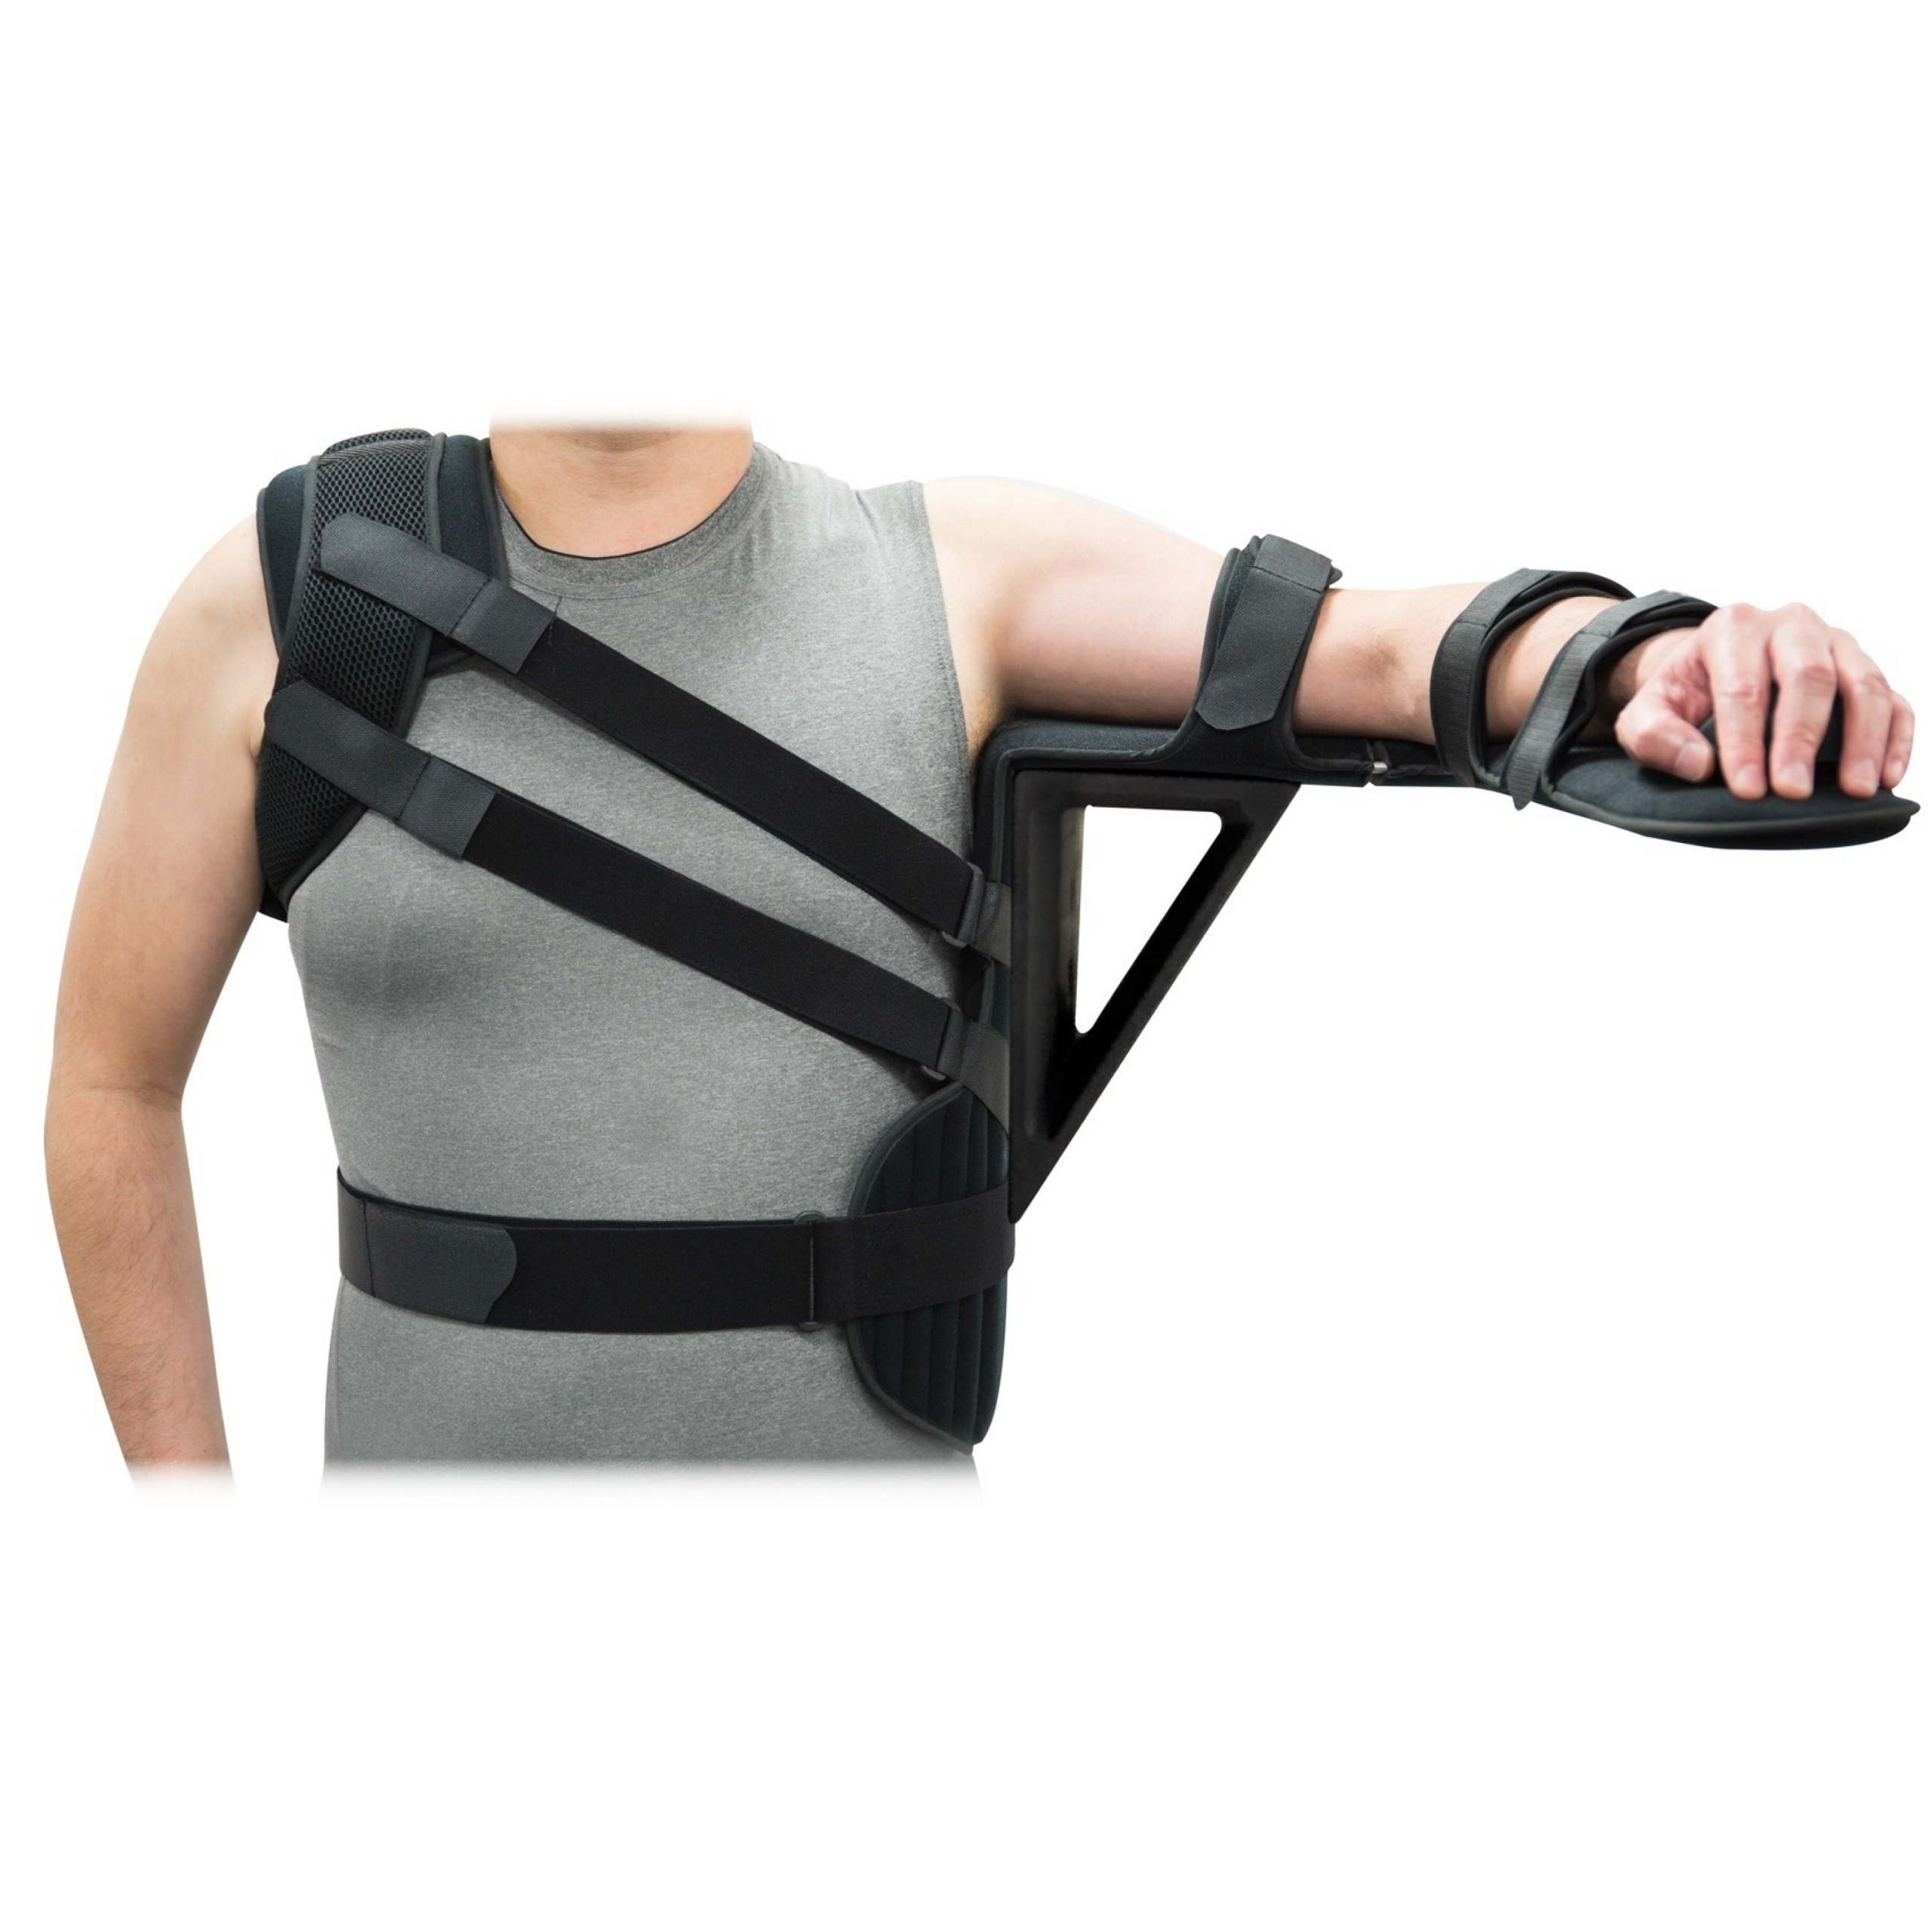 Deluxe Shoulder Abduction System SUGGESTED HCPC: L3960